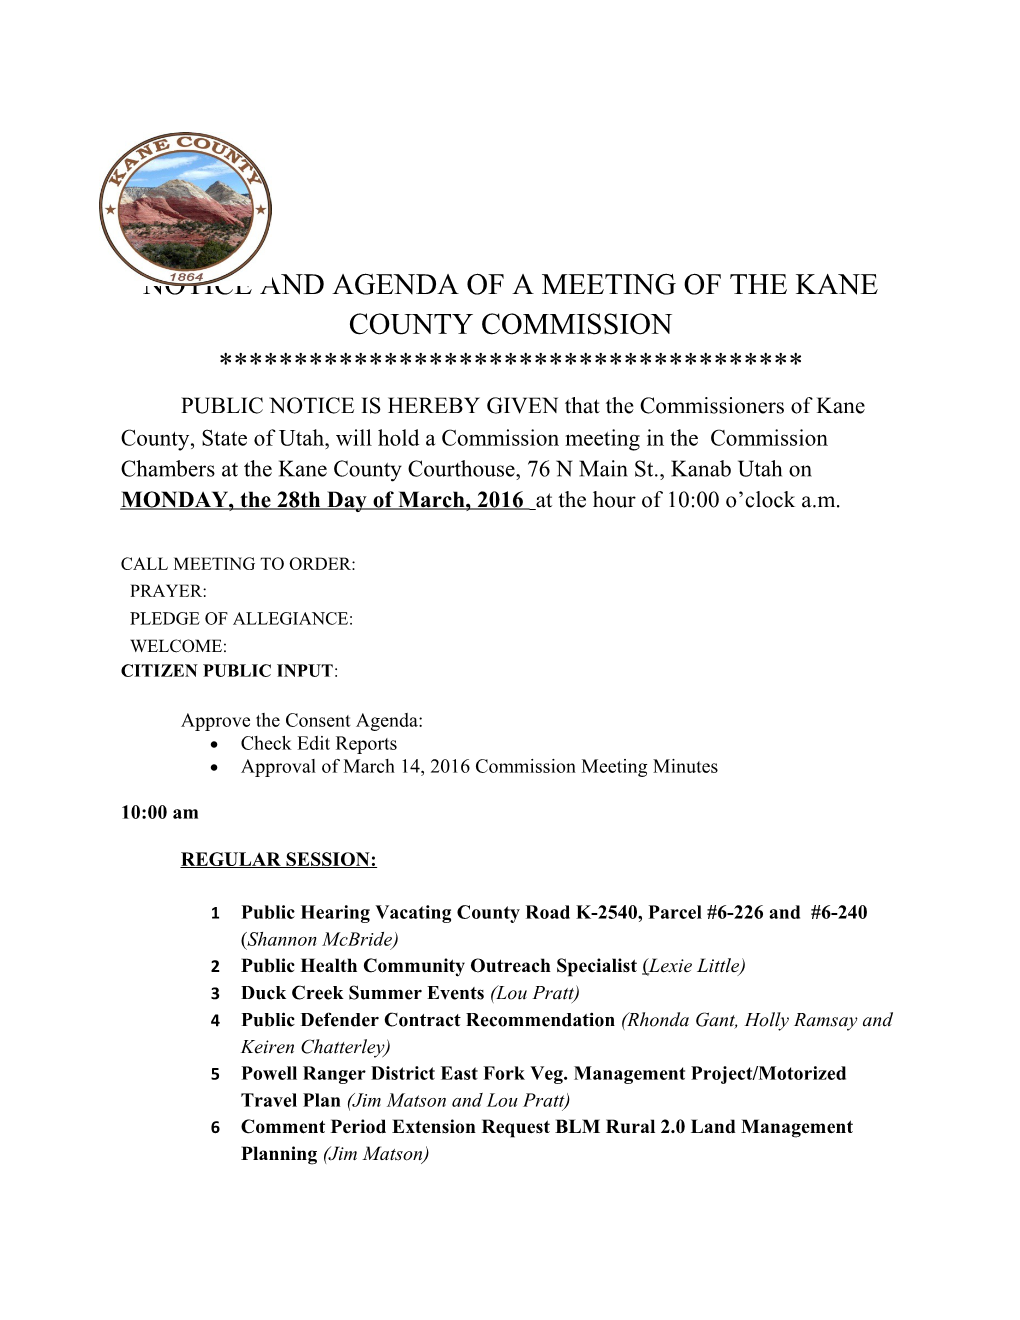 Notice and Agenda of a Meeting of the Kane County Commission